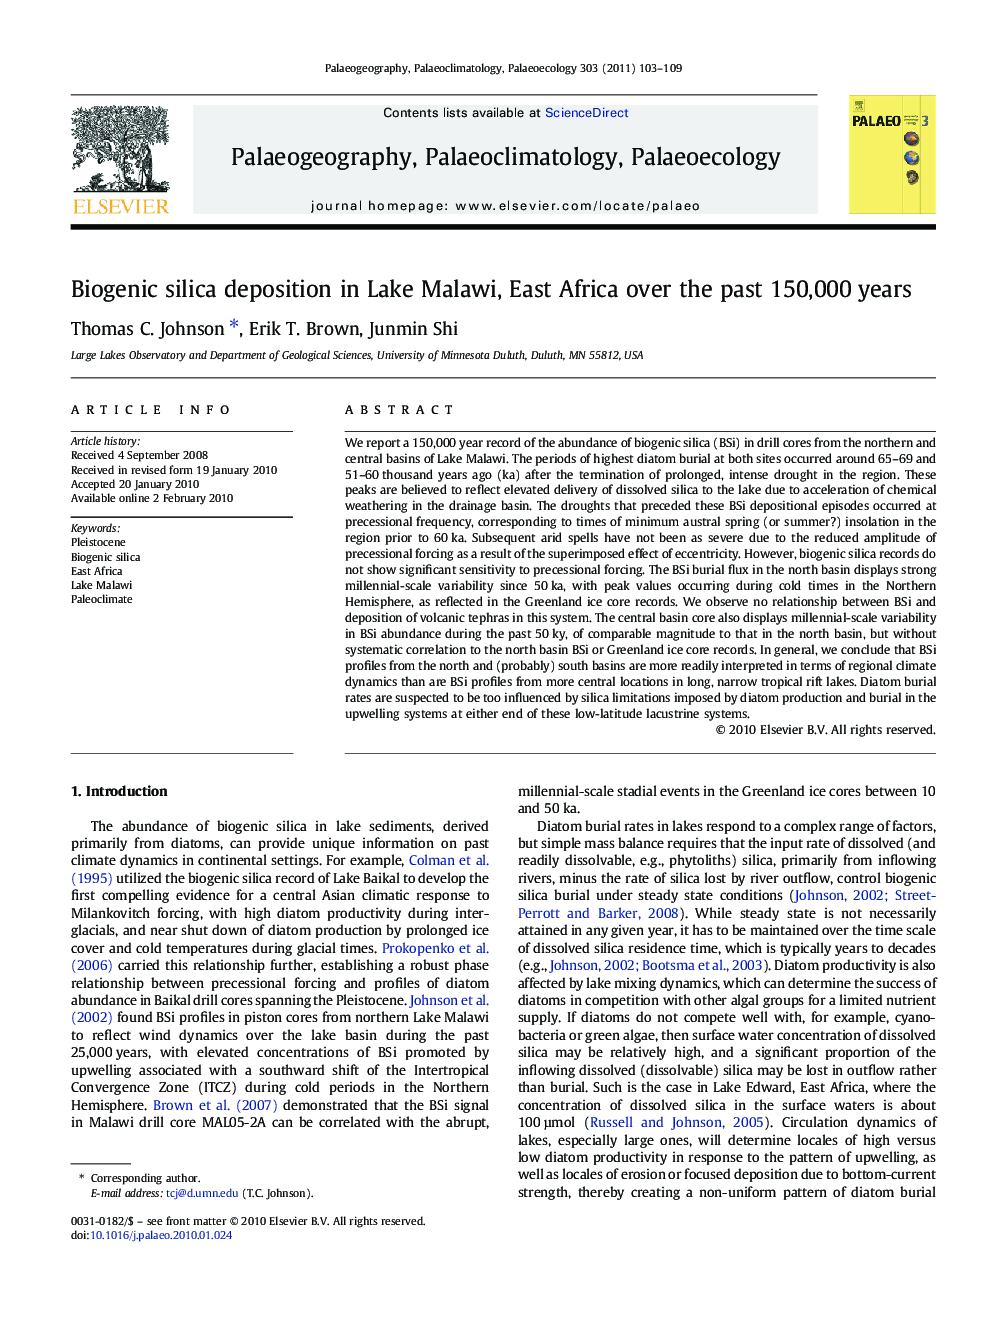 Biogenic silica deposition in Lake Malawi, East Africa over the past 150,000 years